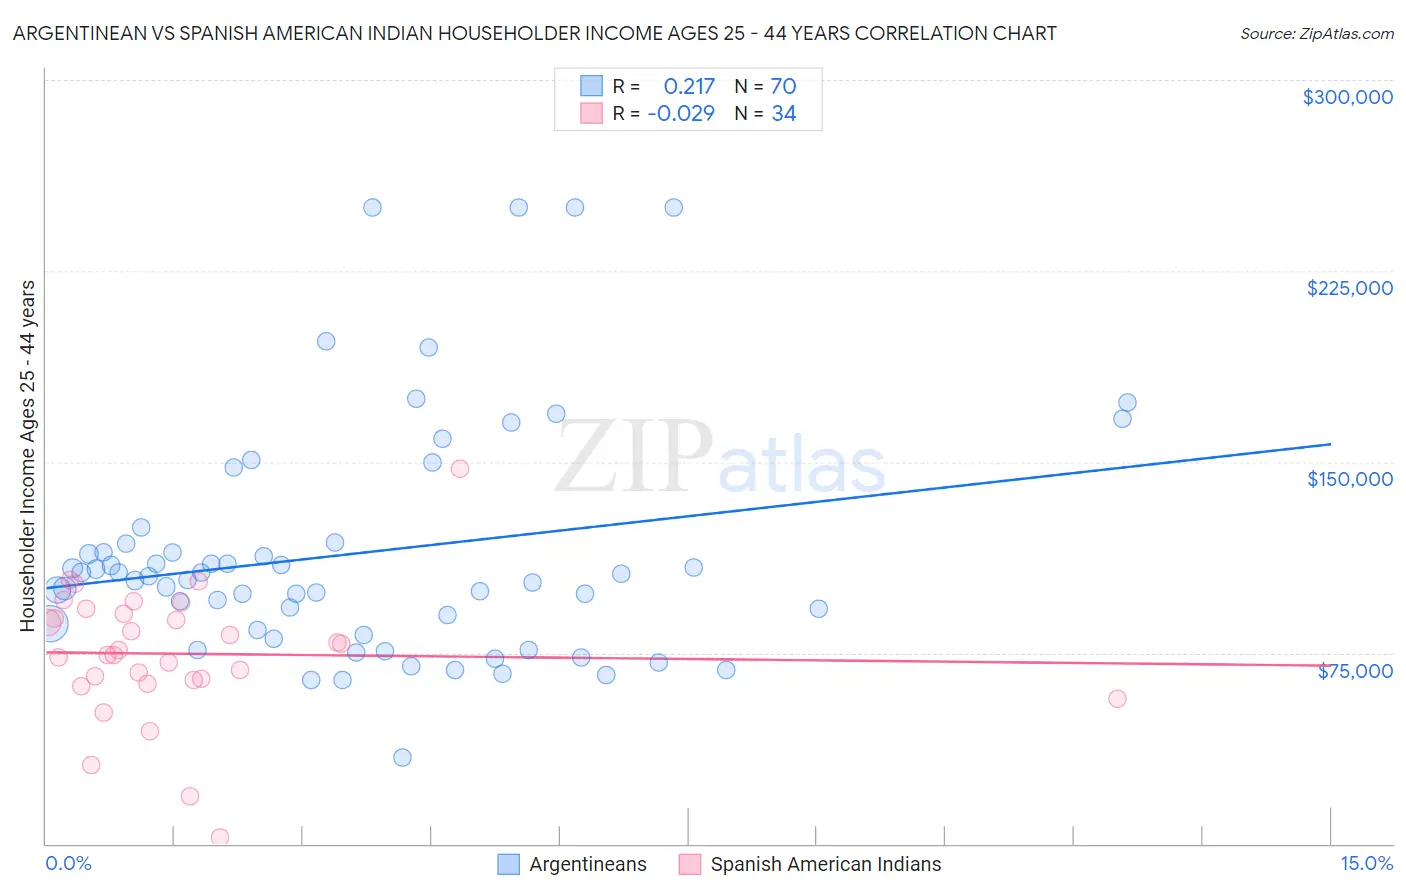 Argentinean vs Spanish American Indian Householder Income Ages 25 - 44 years